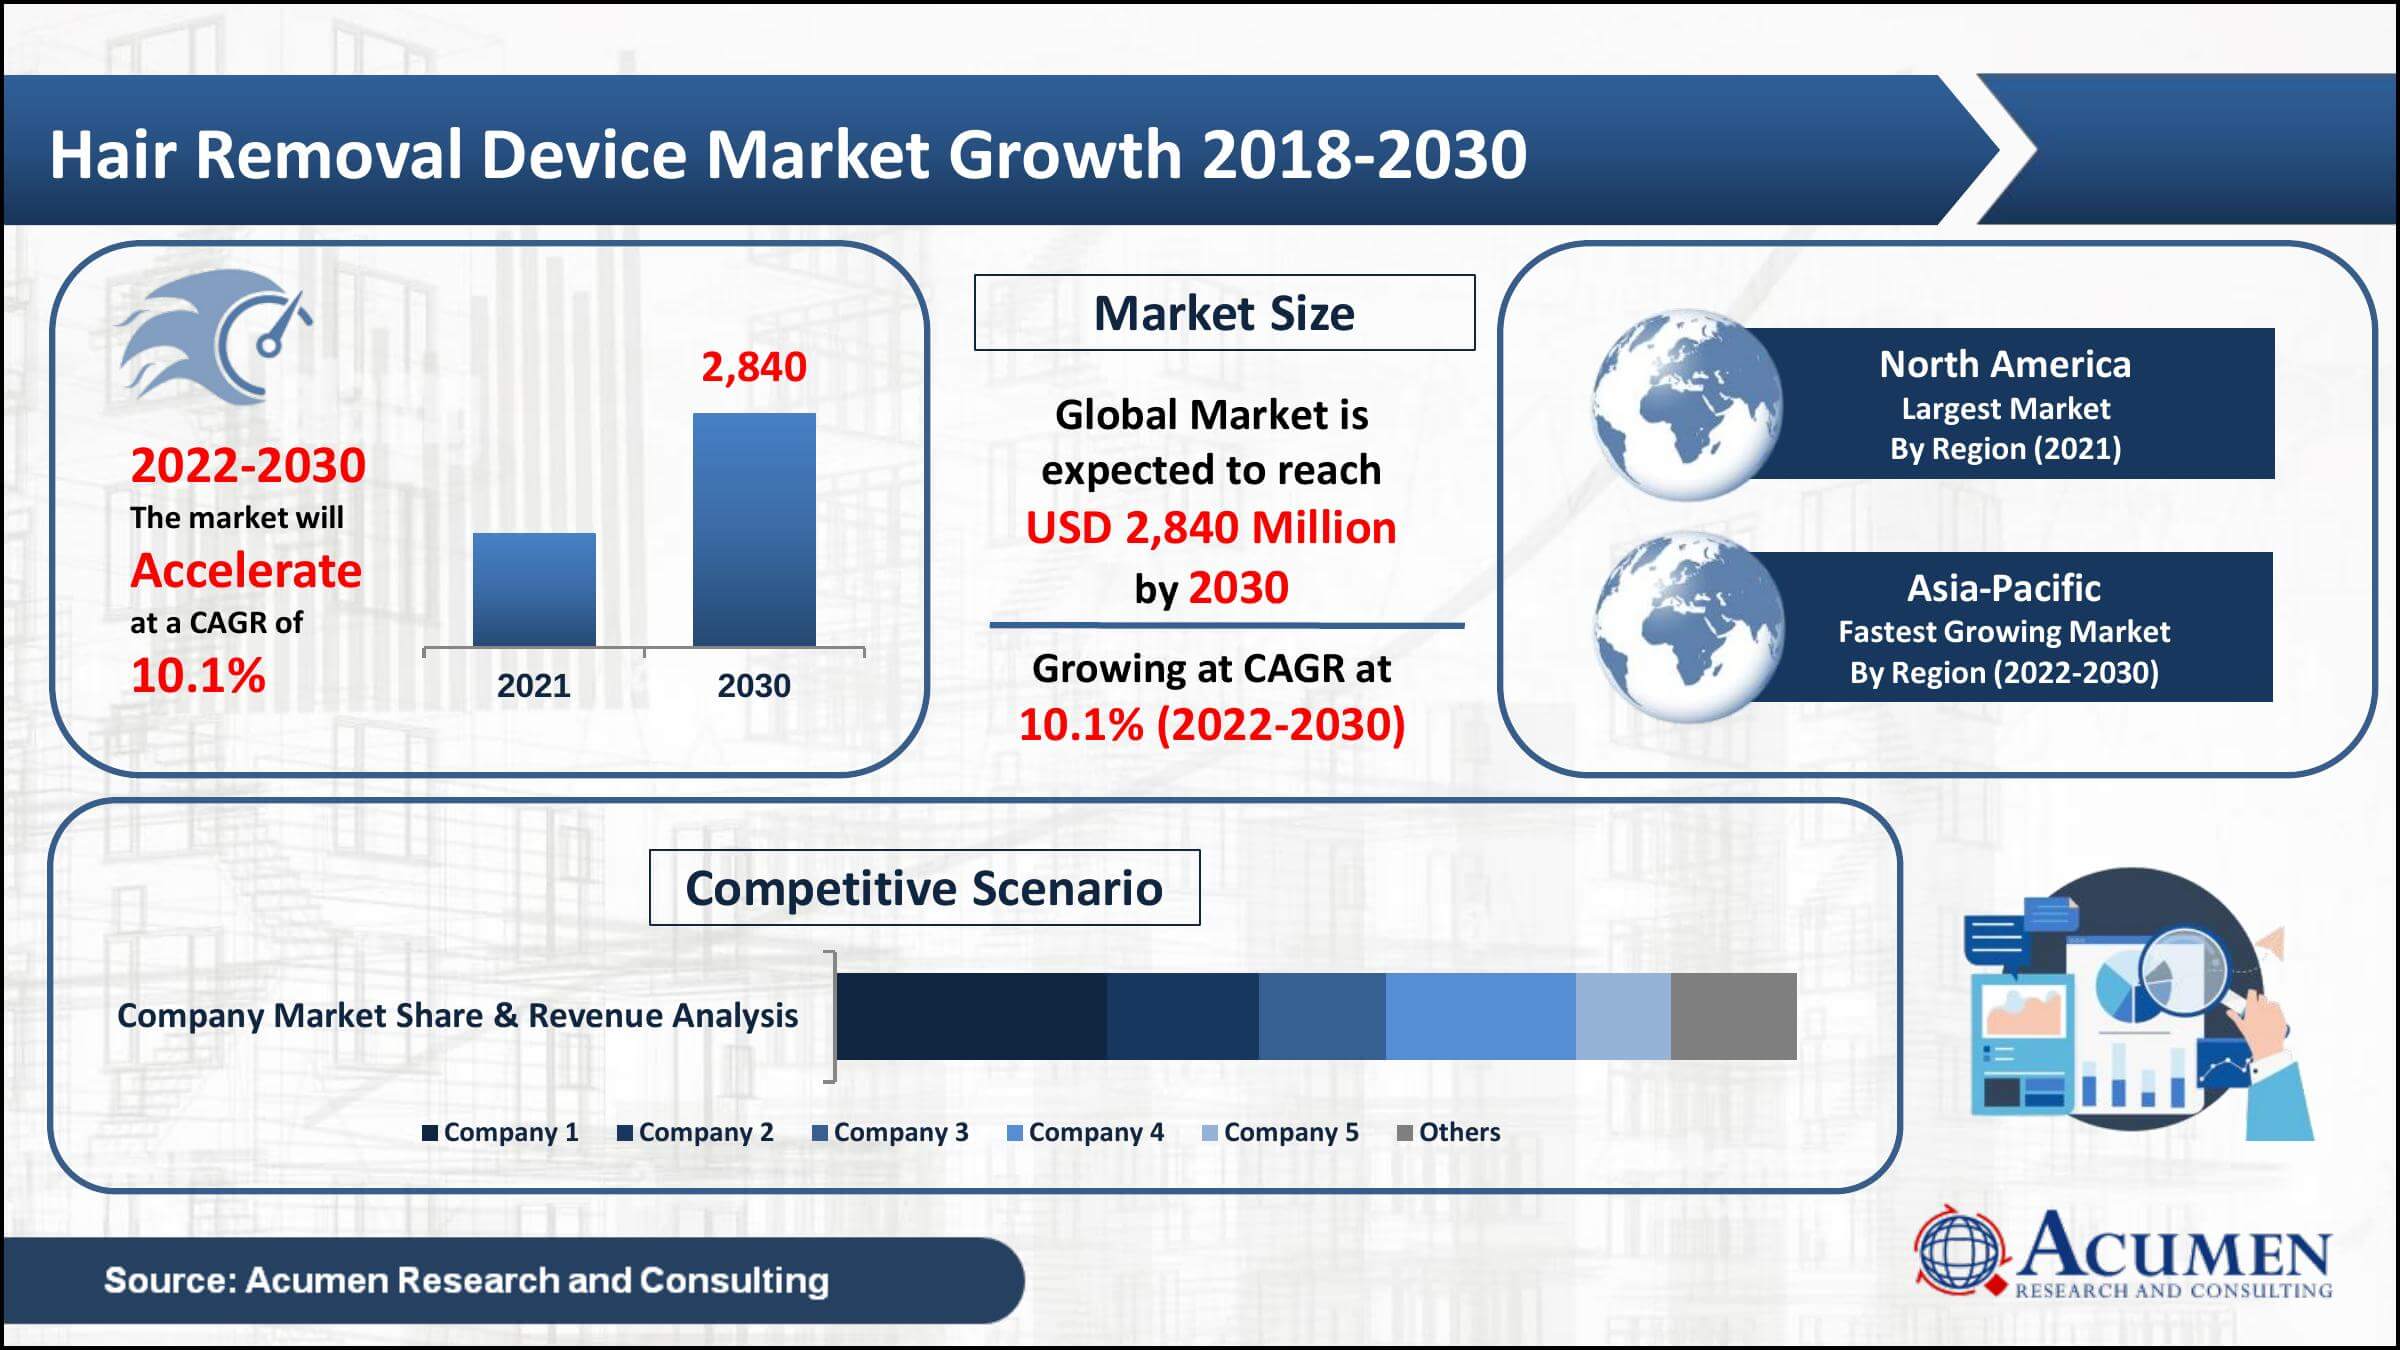 Global hair removal device market value was worth USD 1,199 Million in 2021, with a 10.1% CAGR from 2022 to 2030